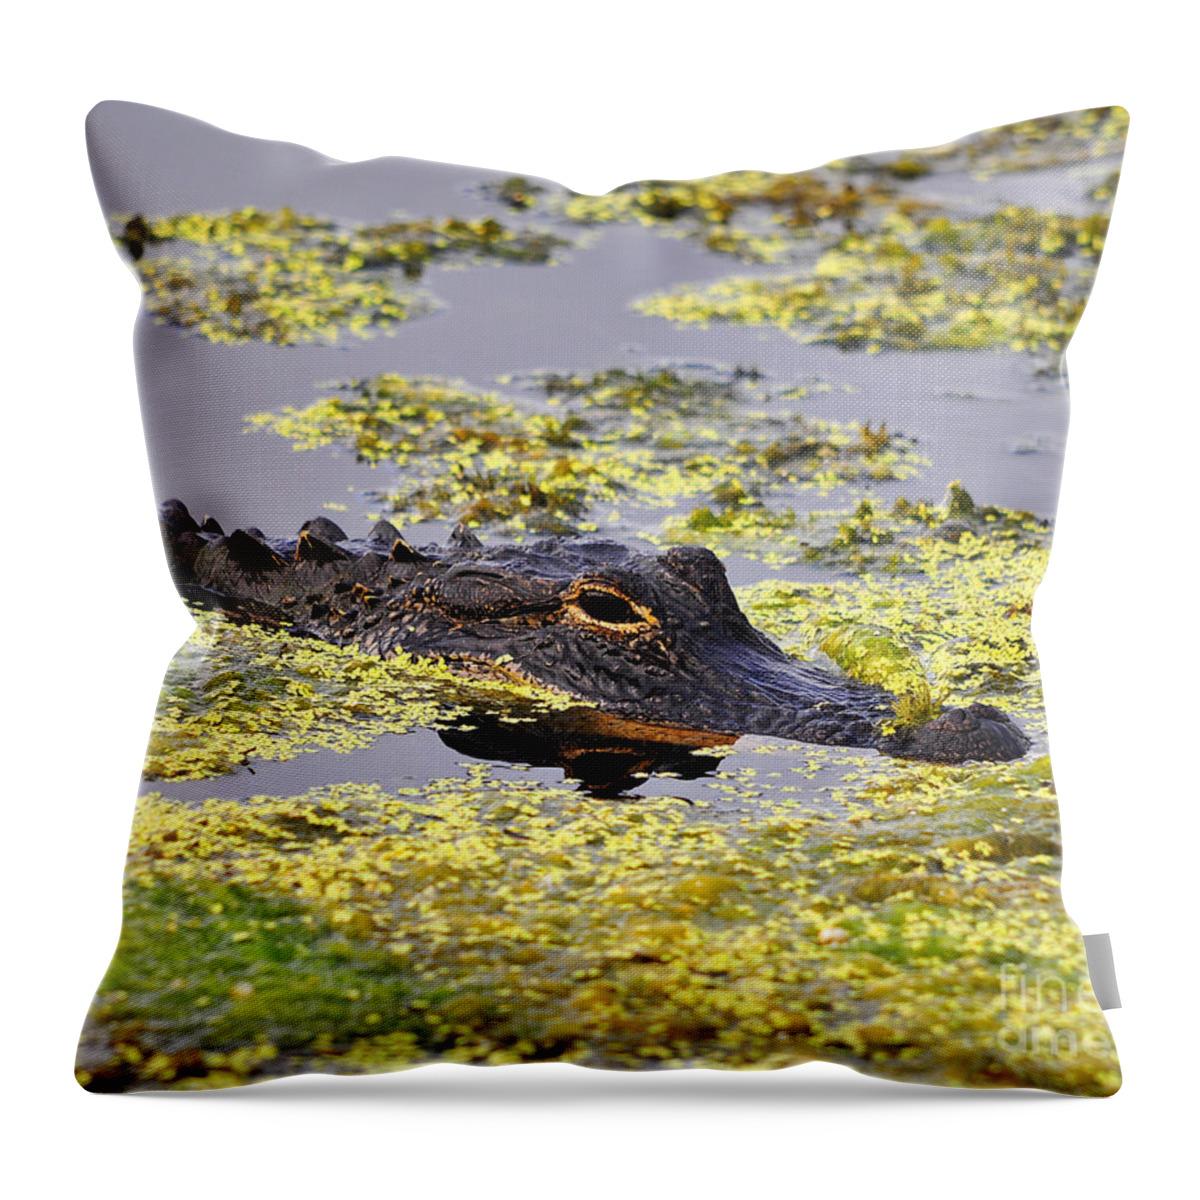 Alligator Throw Pillow featuring the photograph Alligator in Algae #1 by Al Powell Photography USA